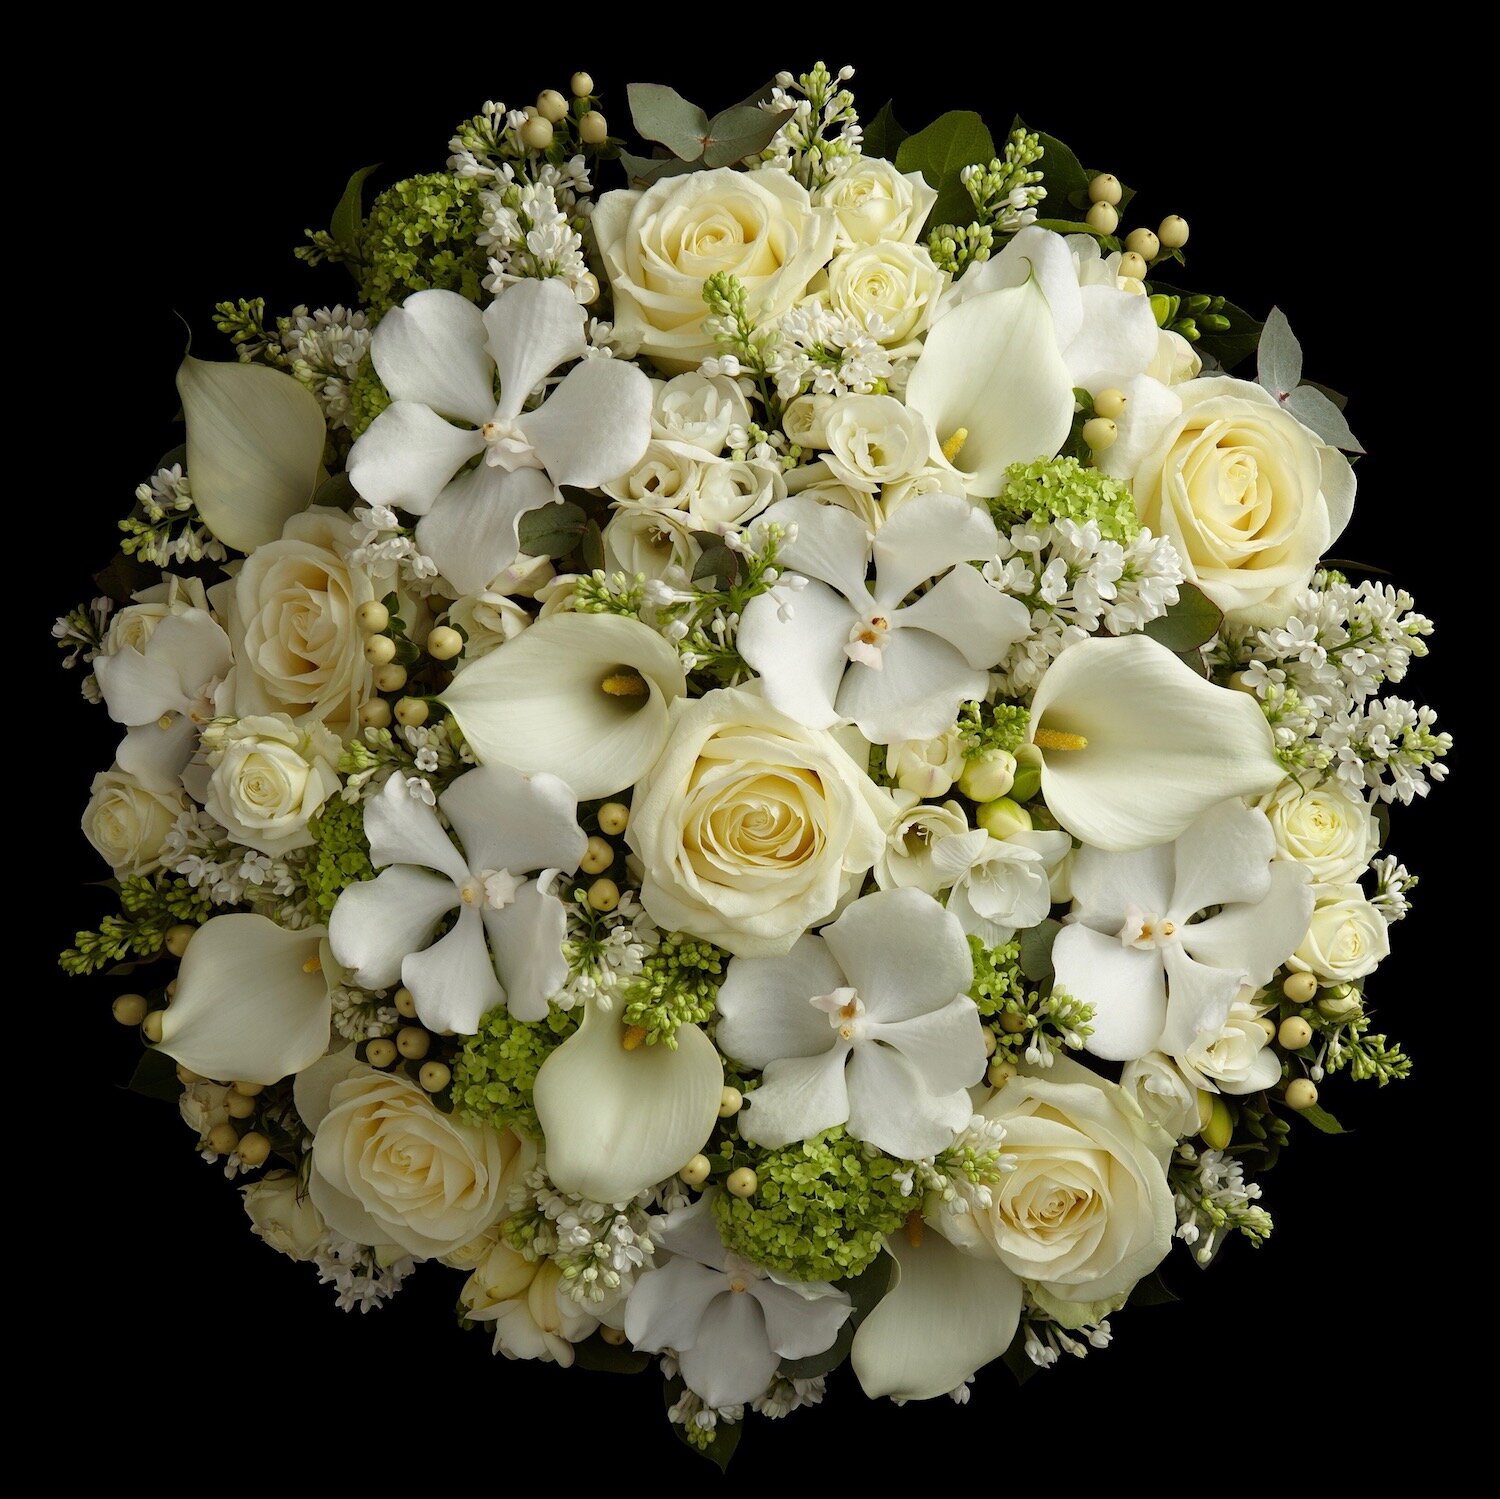 Neill Strain Floral Couture Introduces the New Collection of Valentine’s Day Flowers - white bouquet - on thursd